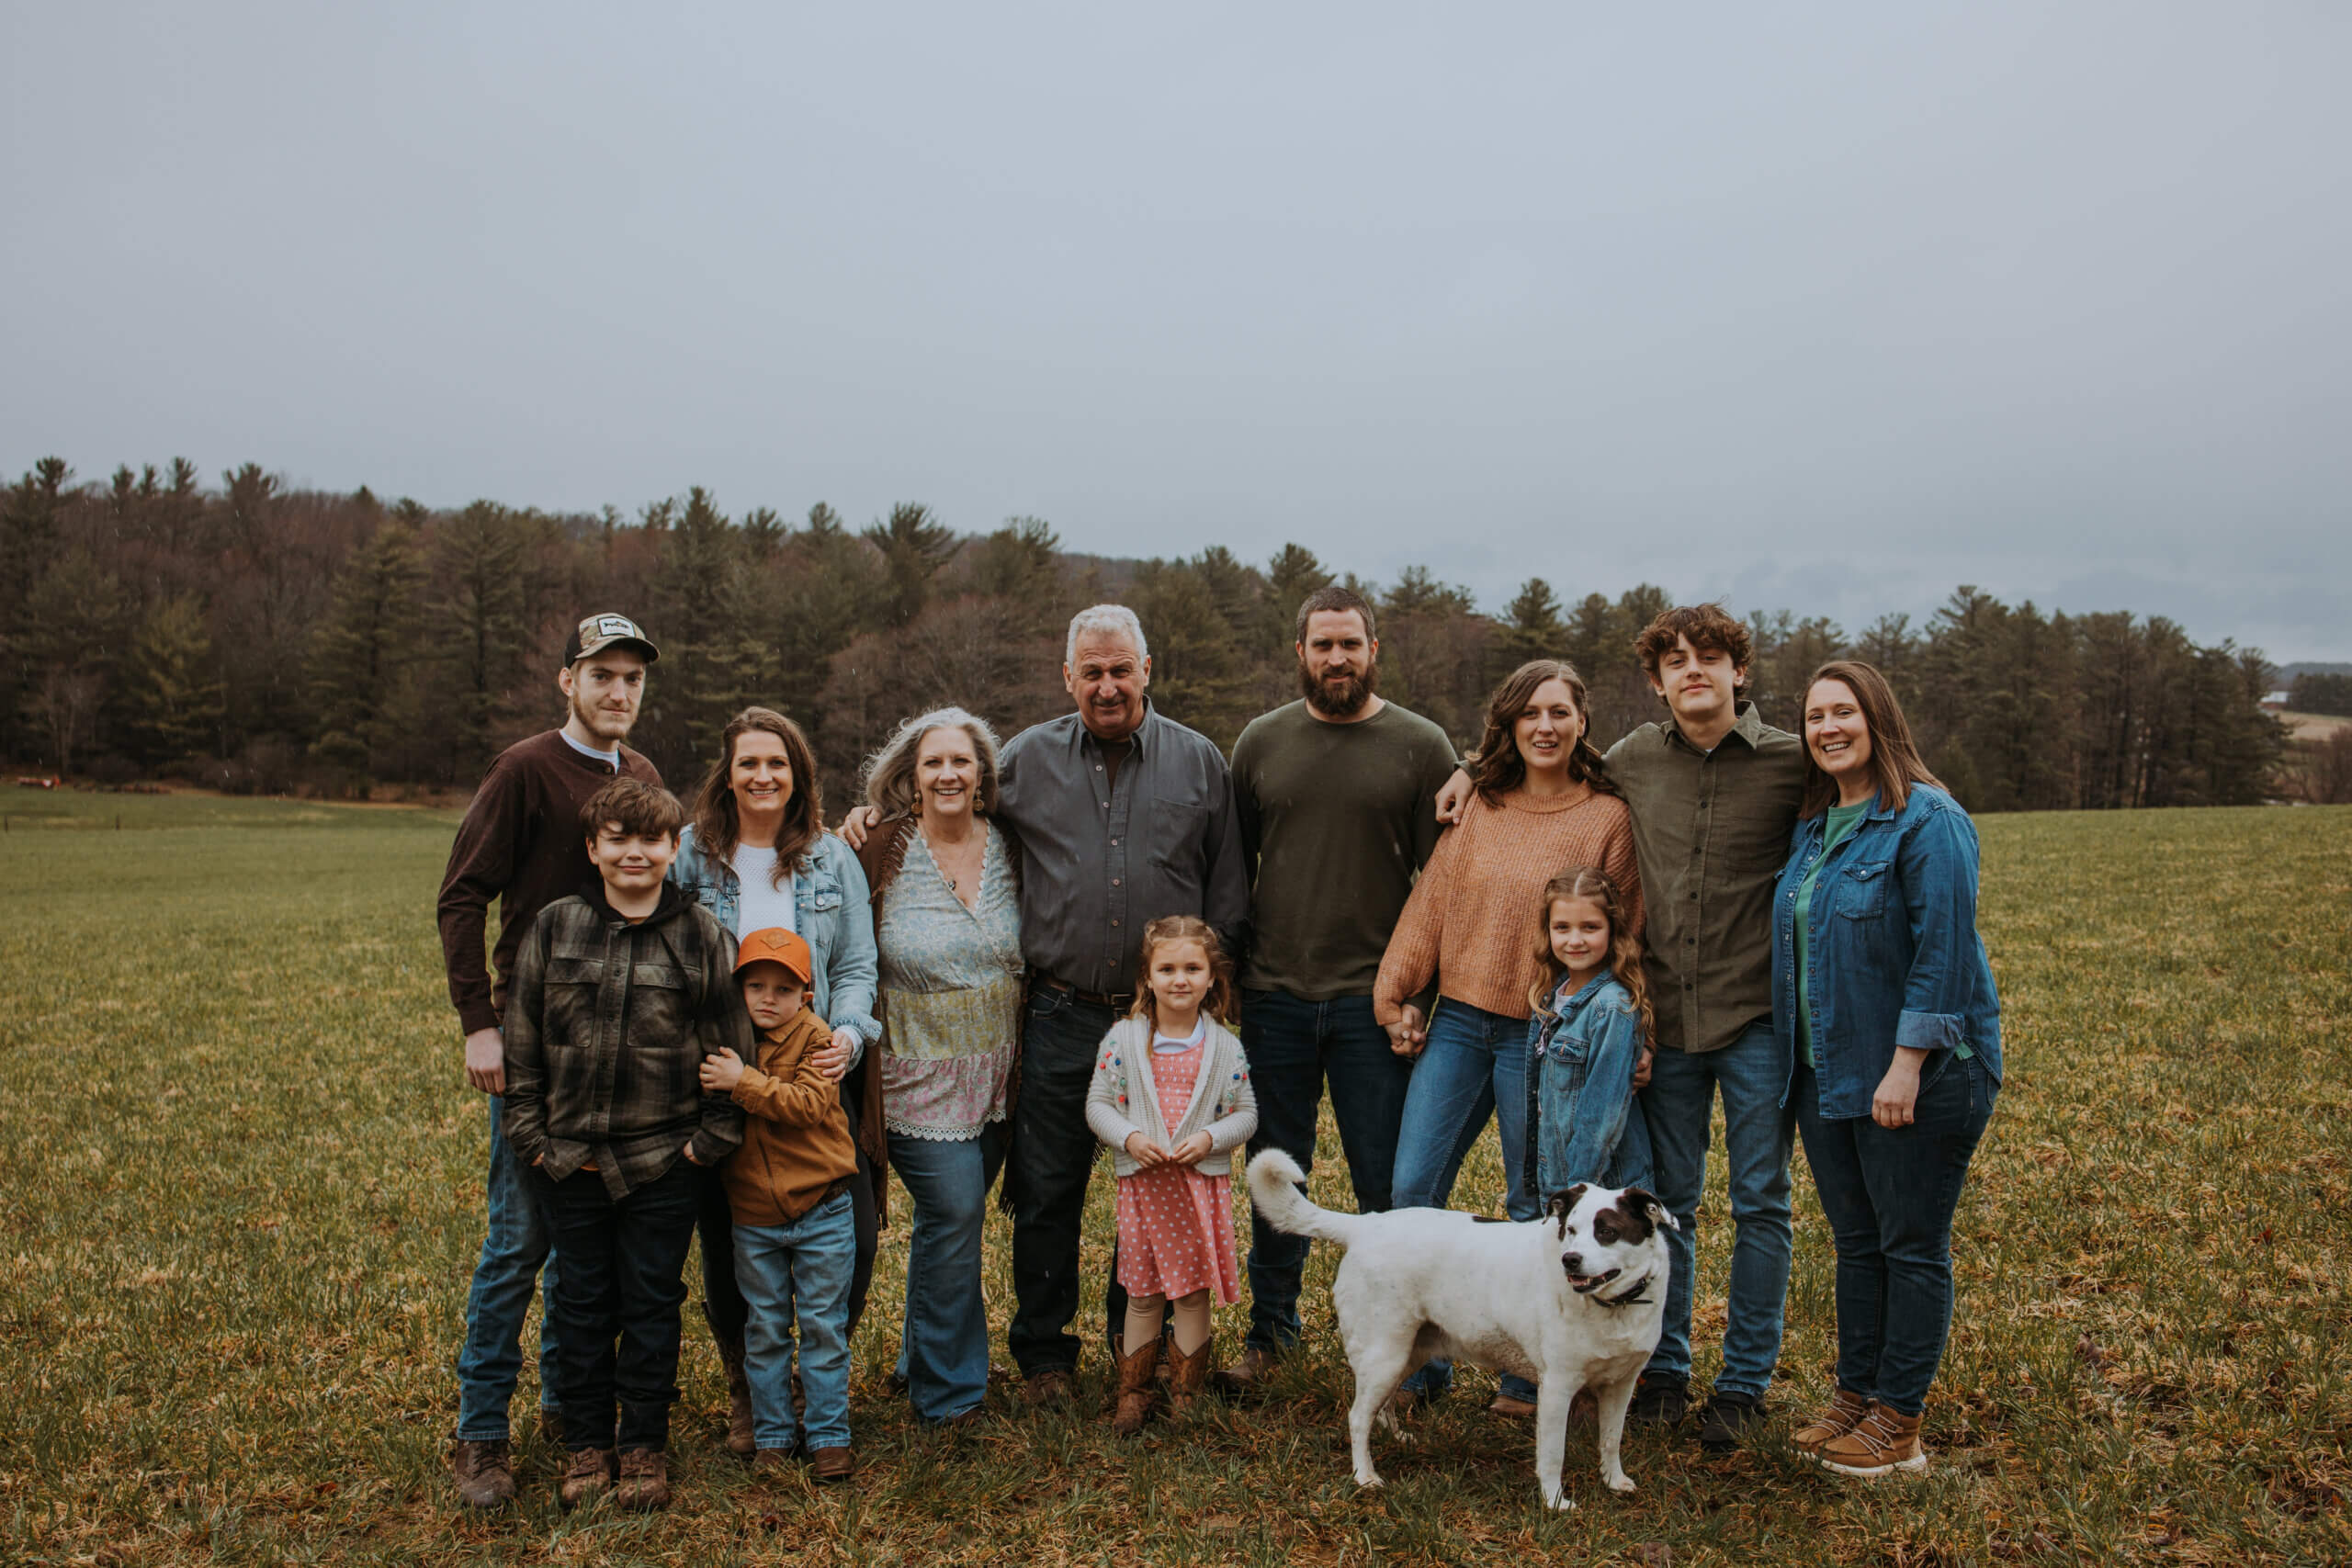 family standing together in a field with a dog in the front and trees in the background. 